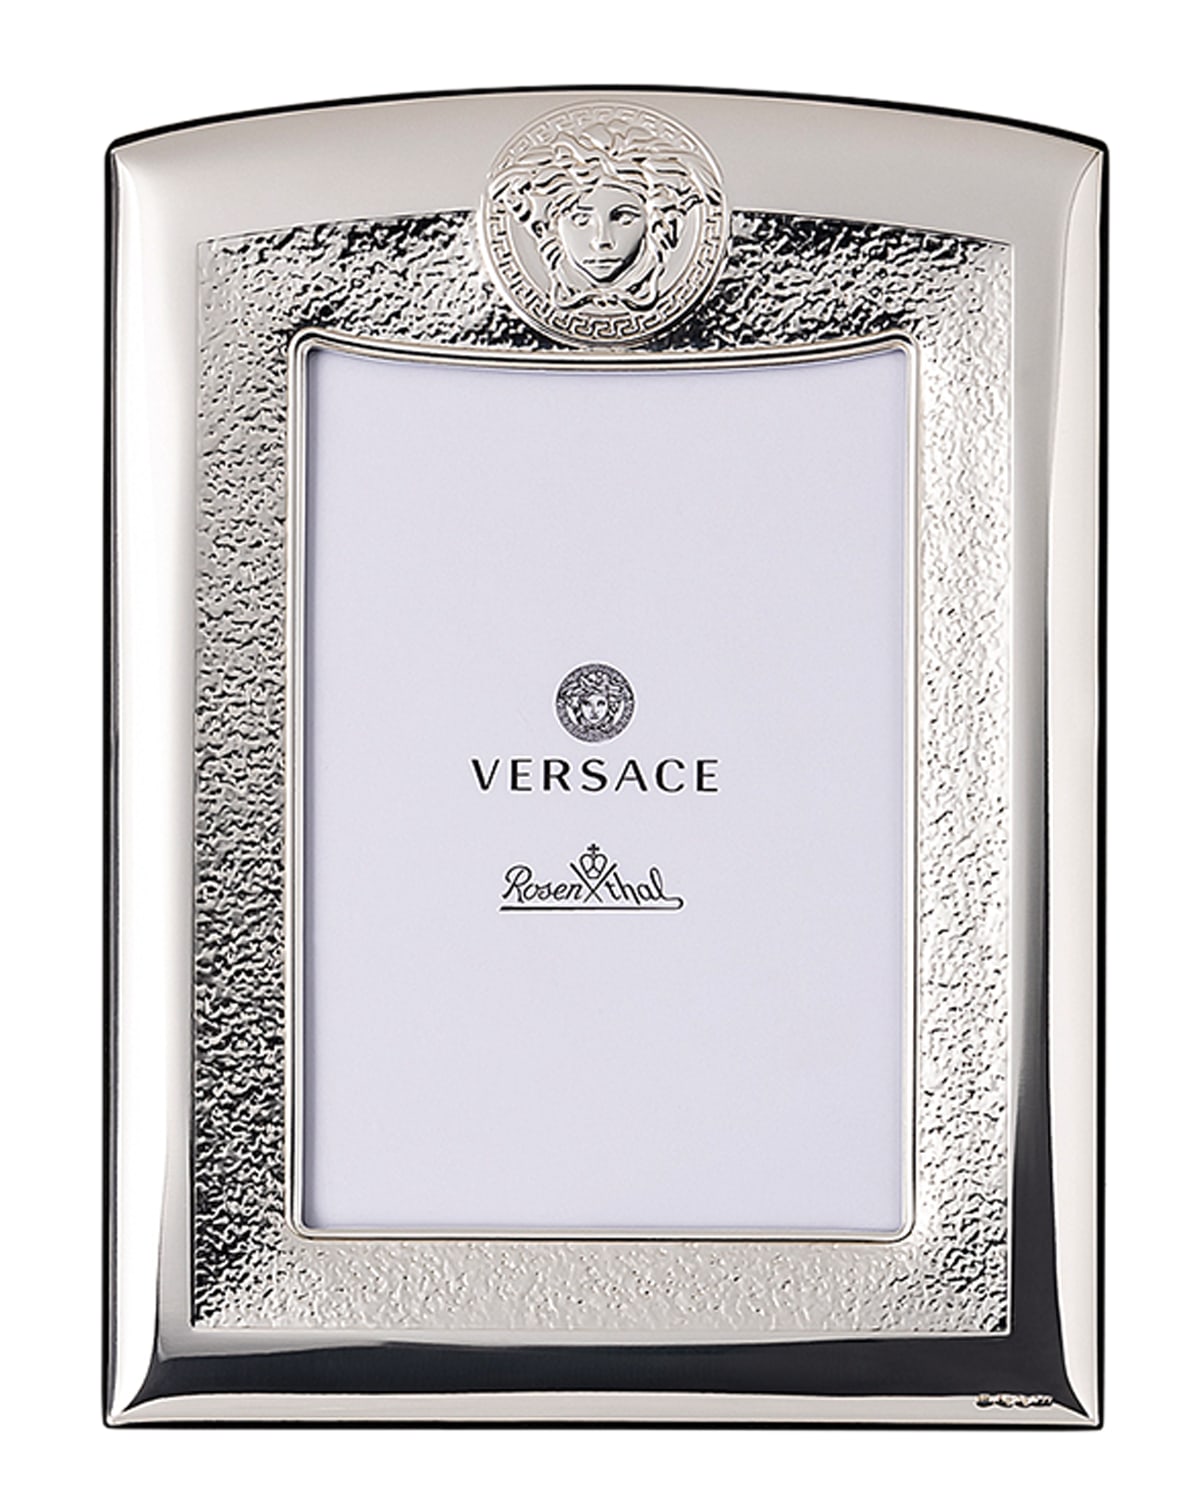 Versace Vhf7 Picture Frame In Silver, 3x5